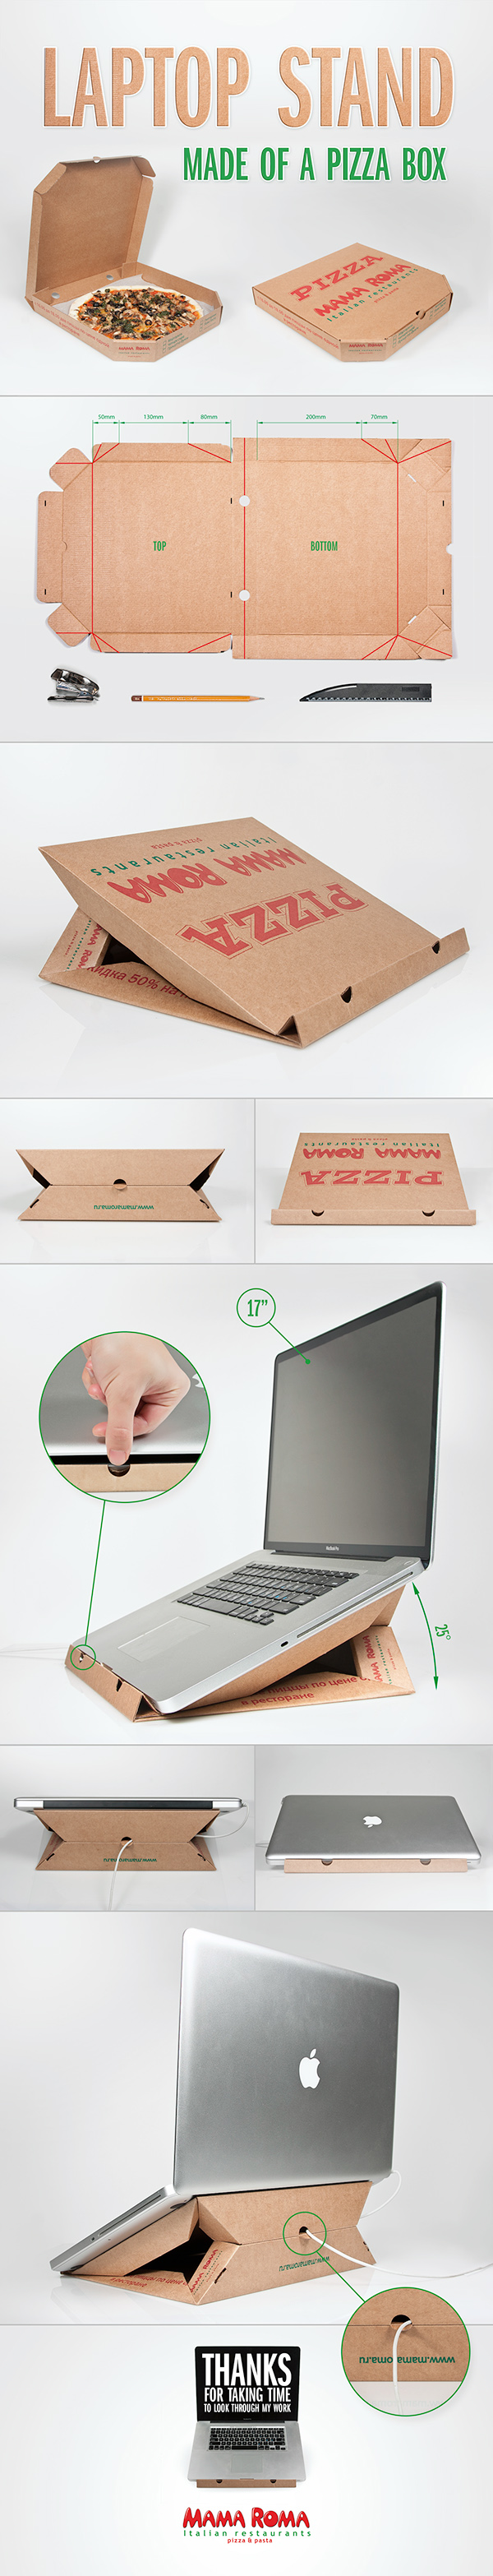 laptop stand box Pizza cardboard package handmade free notebook design